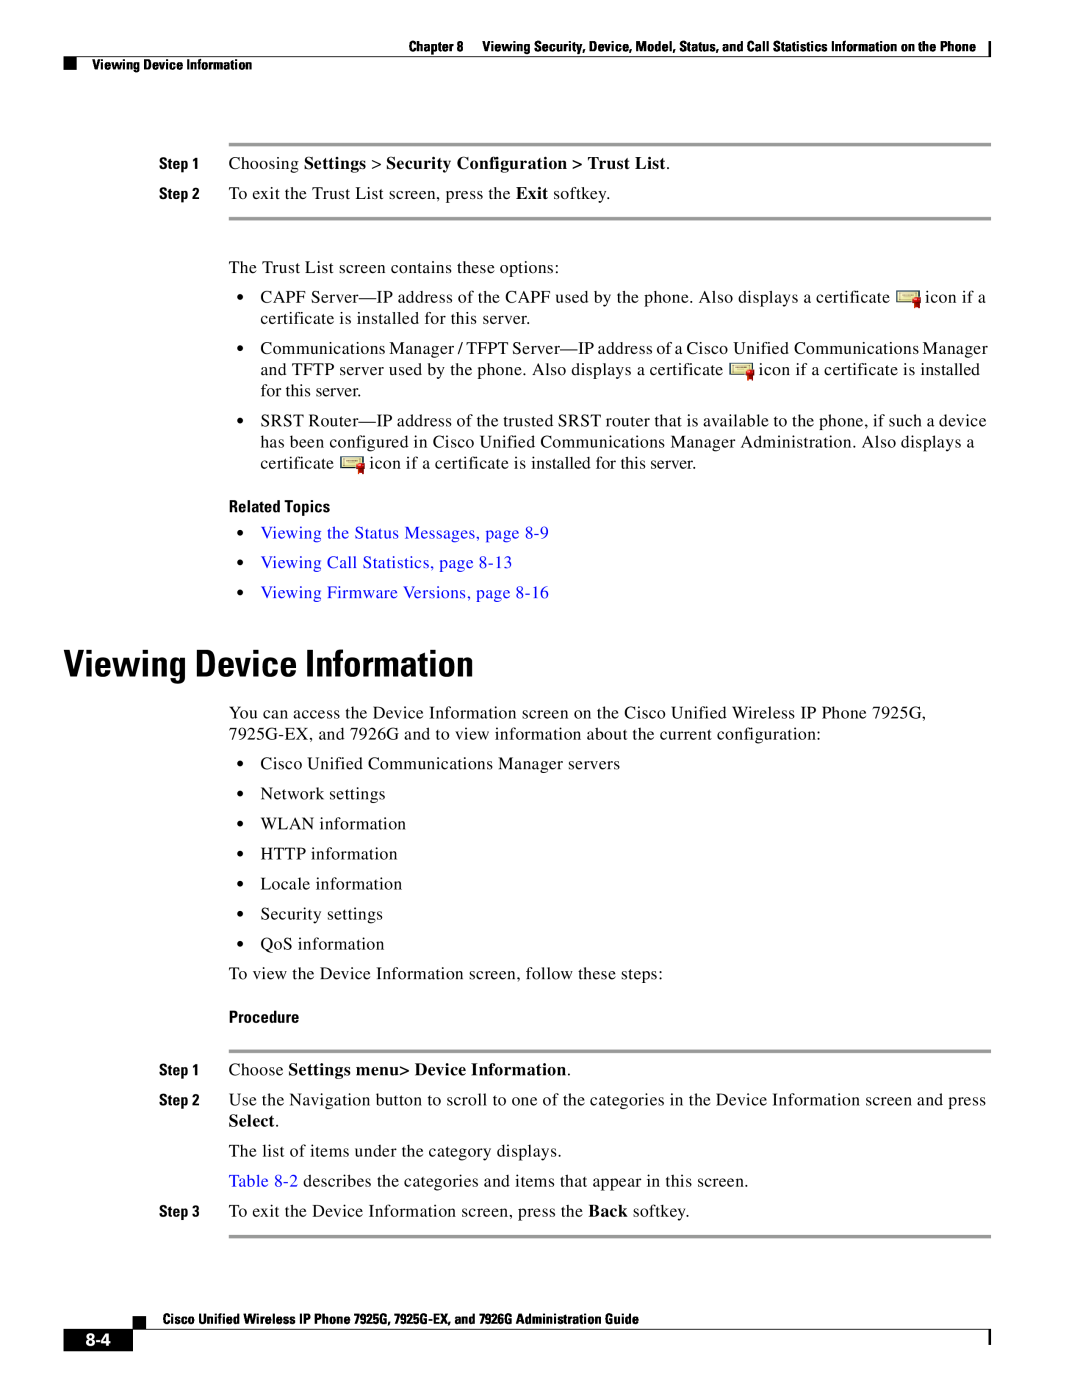 Cisco Systems 7926G, 7925G Viewing Device Information, Choosing Settings Security Configuration Trust List, Related Topics 